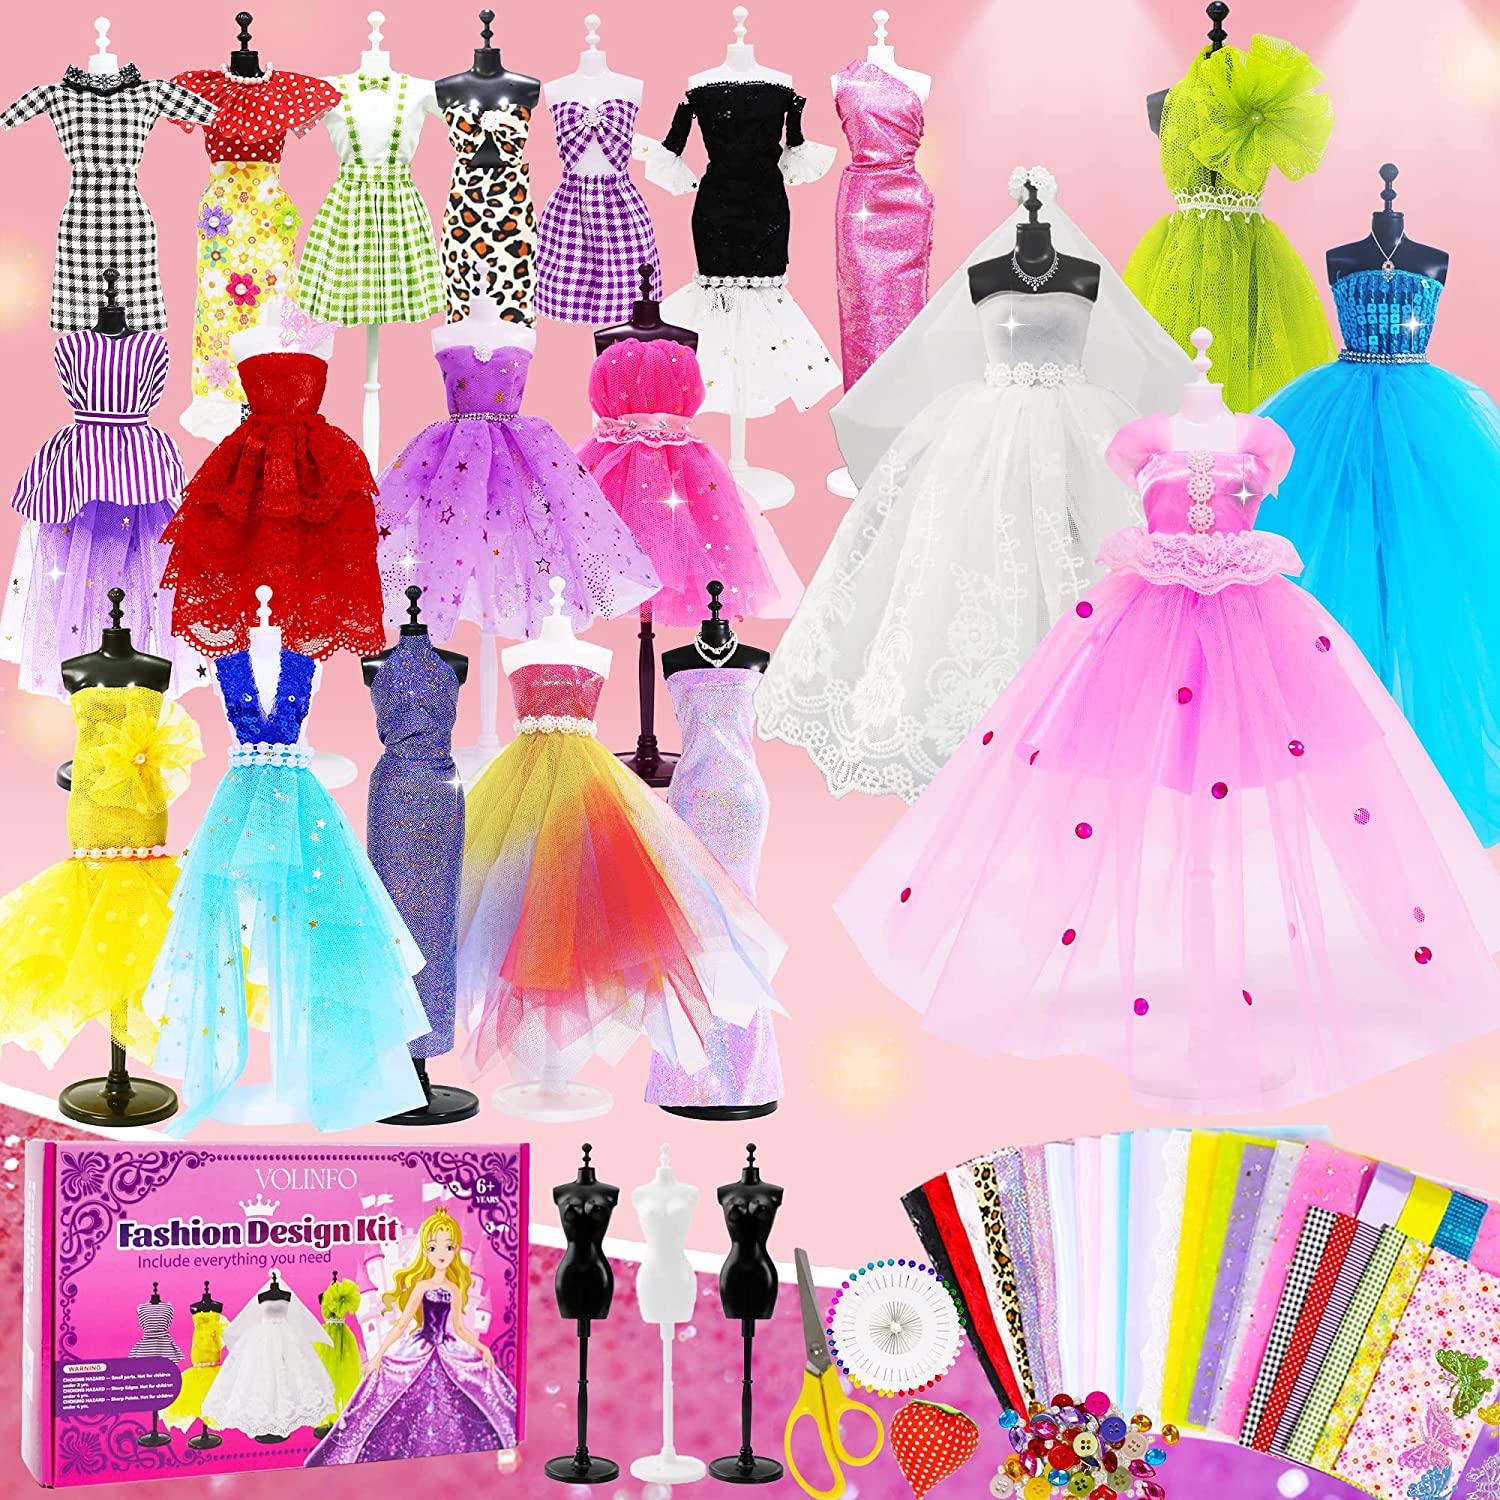  soputry Dress Design Craft Making Kit, Fashion Designer Kits  for Girls with Mannequins Clothing Creative DIY Art Craft Toys, Doll  Clothes Sewing Kit for Girls Ages 6-12+ Birthday Gift (Pink+Purple) 